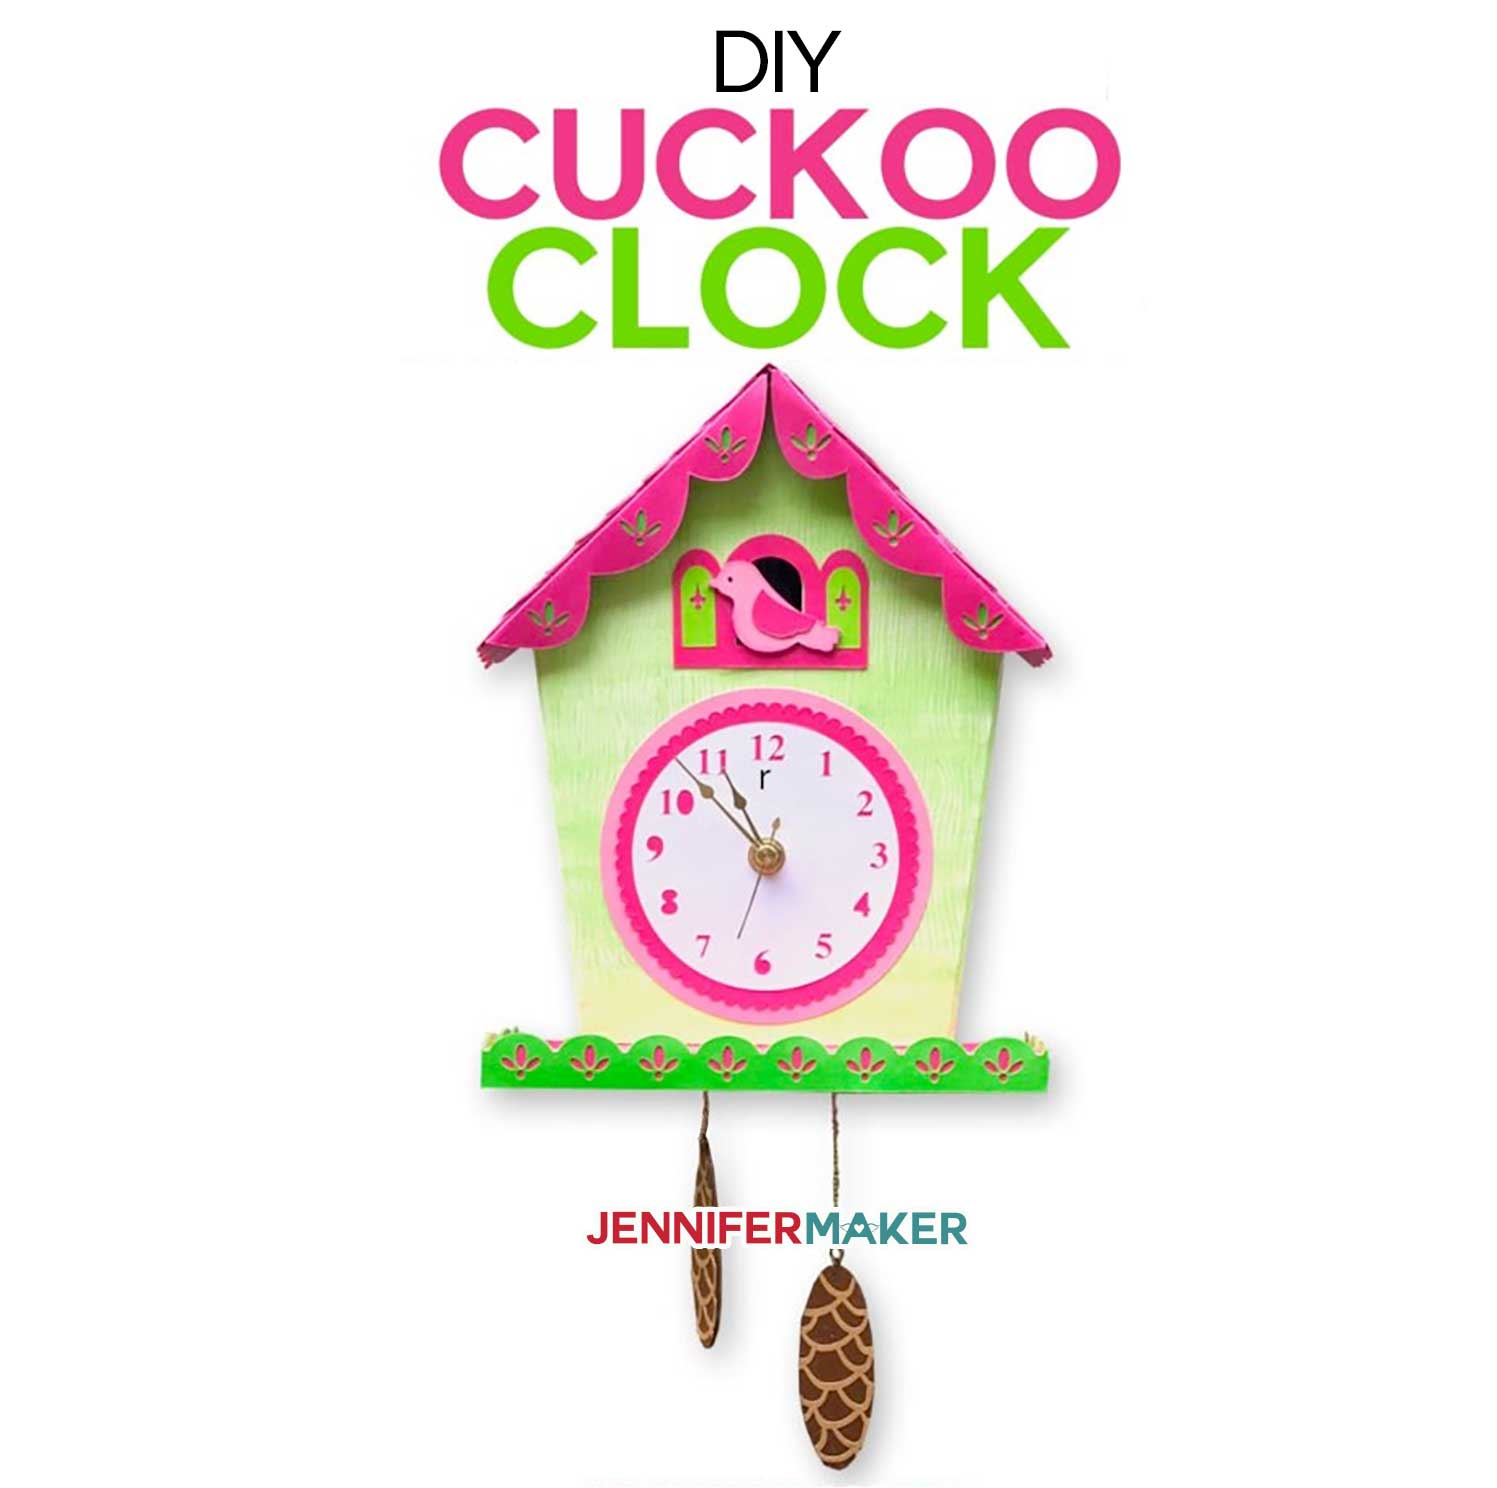 DIY Wall Clock with a Cuckoo! (Yes, It Really Tells Time!)